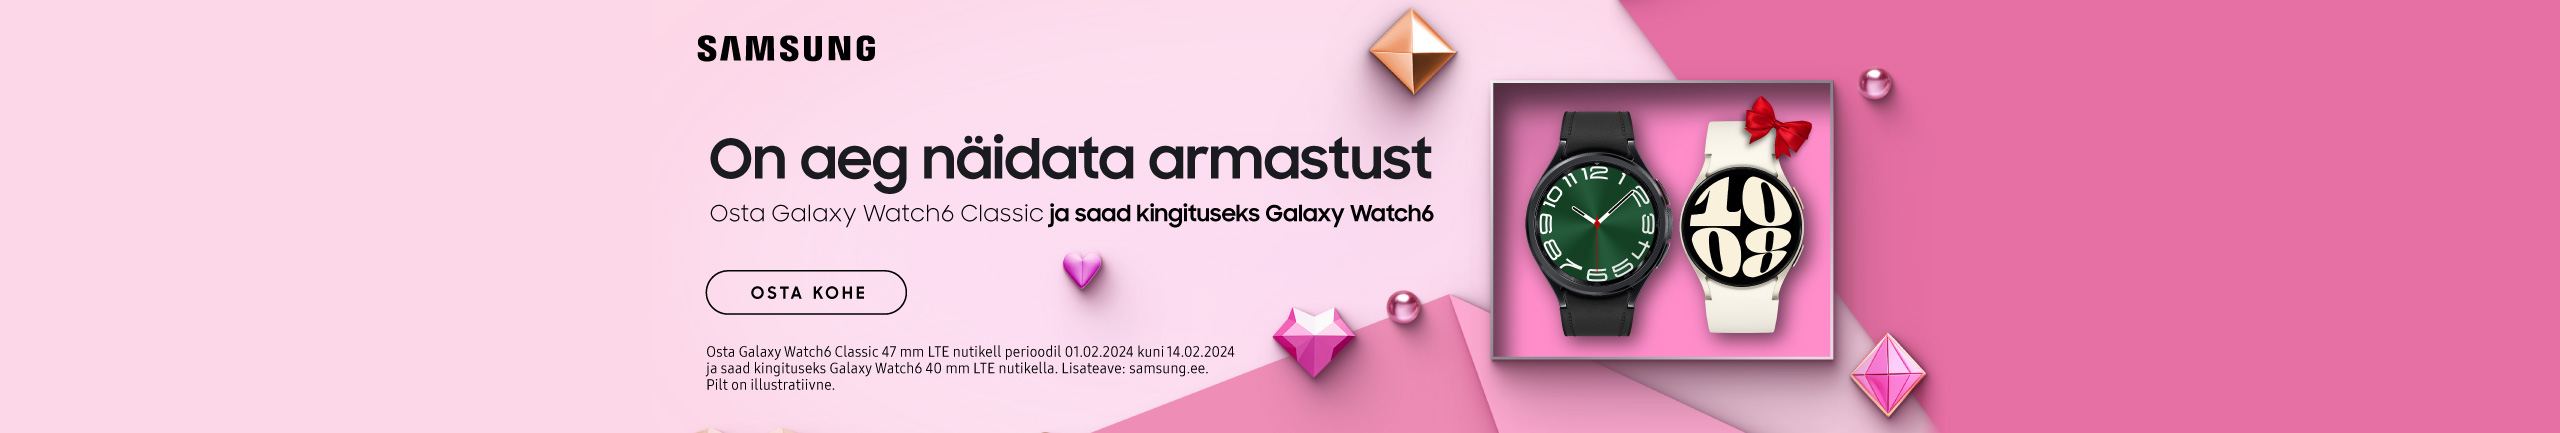 Buy Samsung Galaxy Watch 6 Classic and get Watch 6 as a complimentary gift!